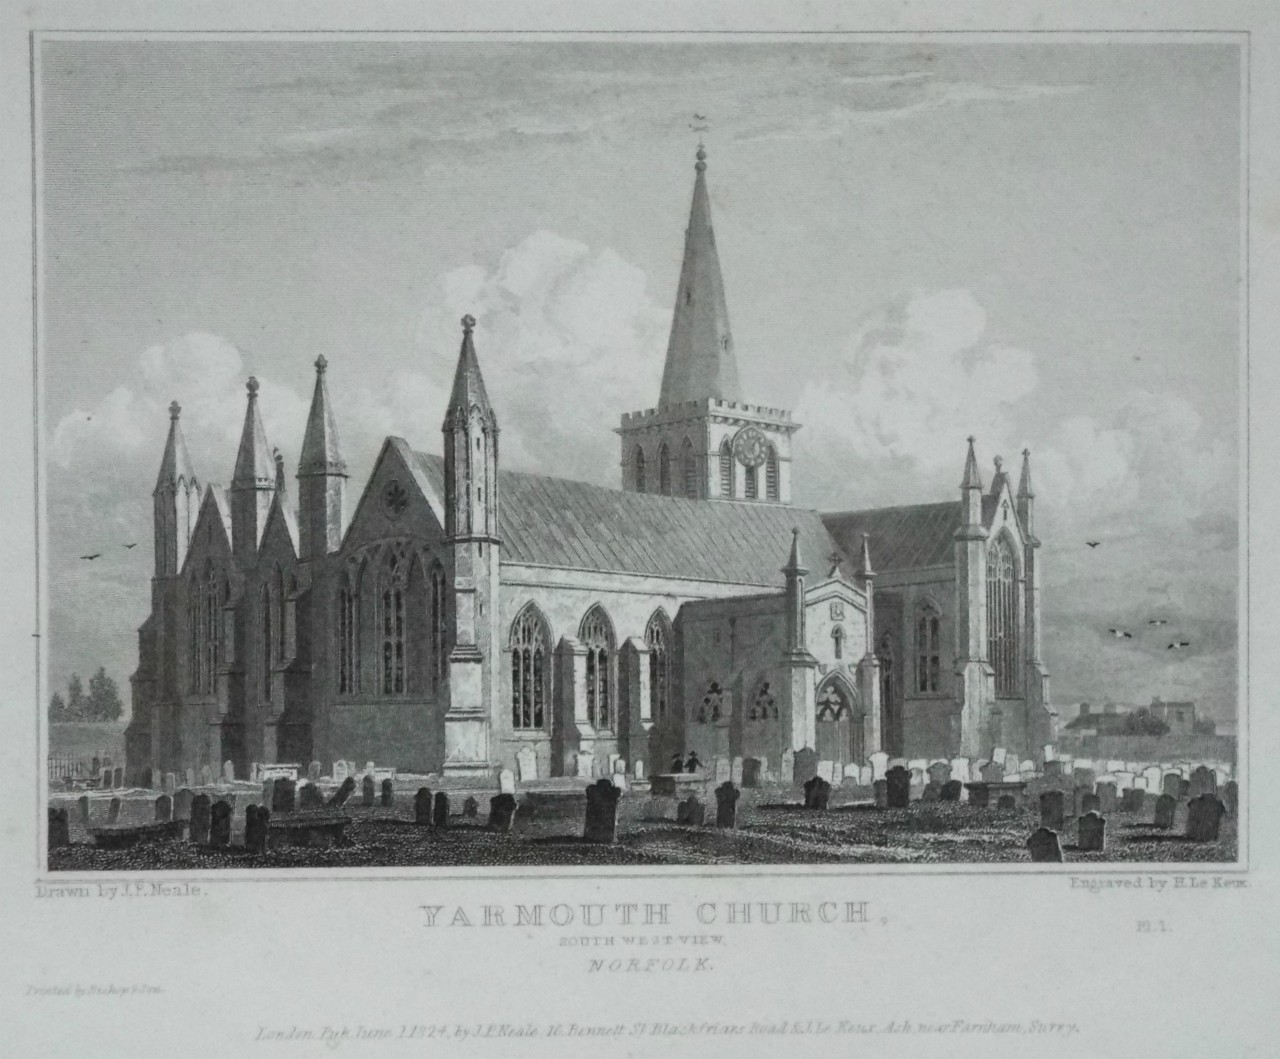 Print - Yarmouth Church, South West View, Norfolk. - Le